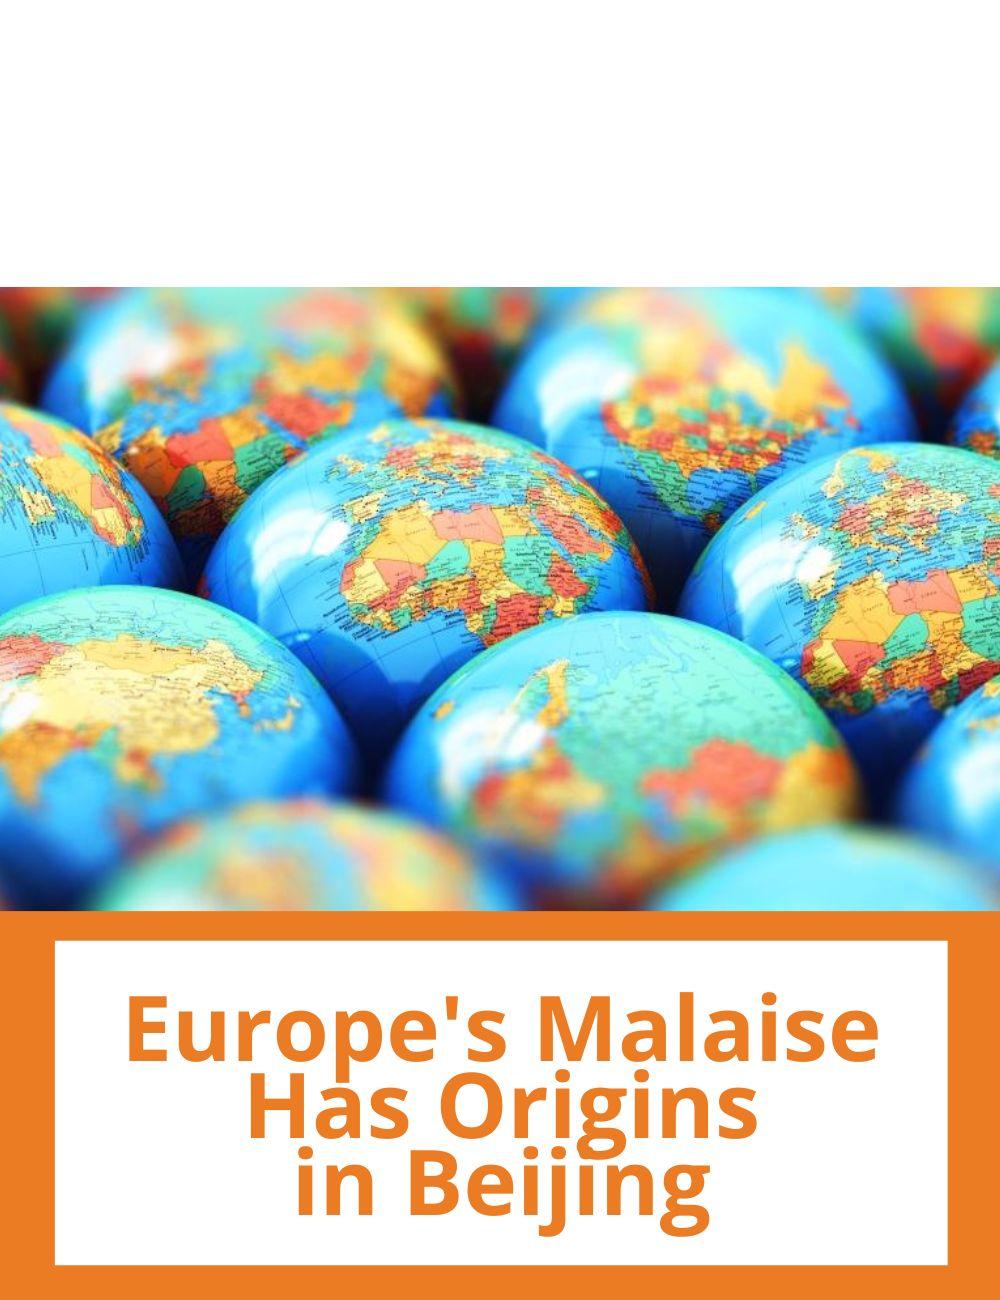 Link to related stories. Image: world maps. Story headline: Europe's Malaise Has Origins in Beijing